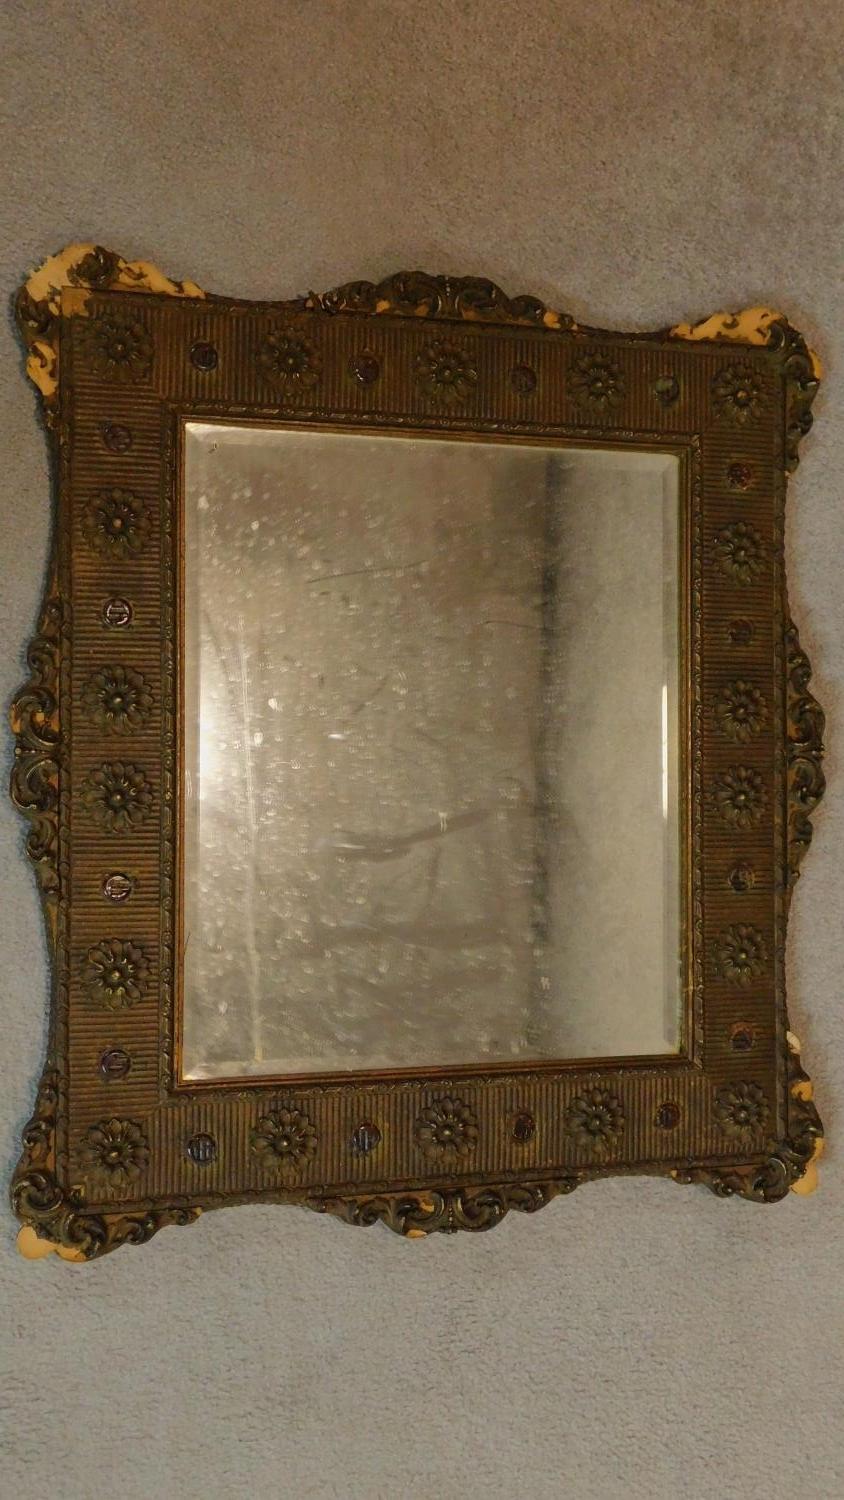 A 19th century gilt and gesso wall mirror with floral borders inset bevelled glass plate. 72x64cm